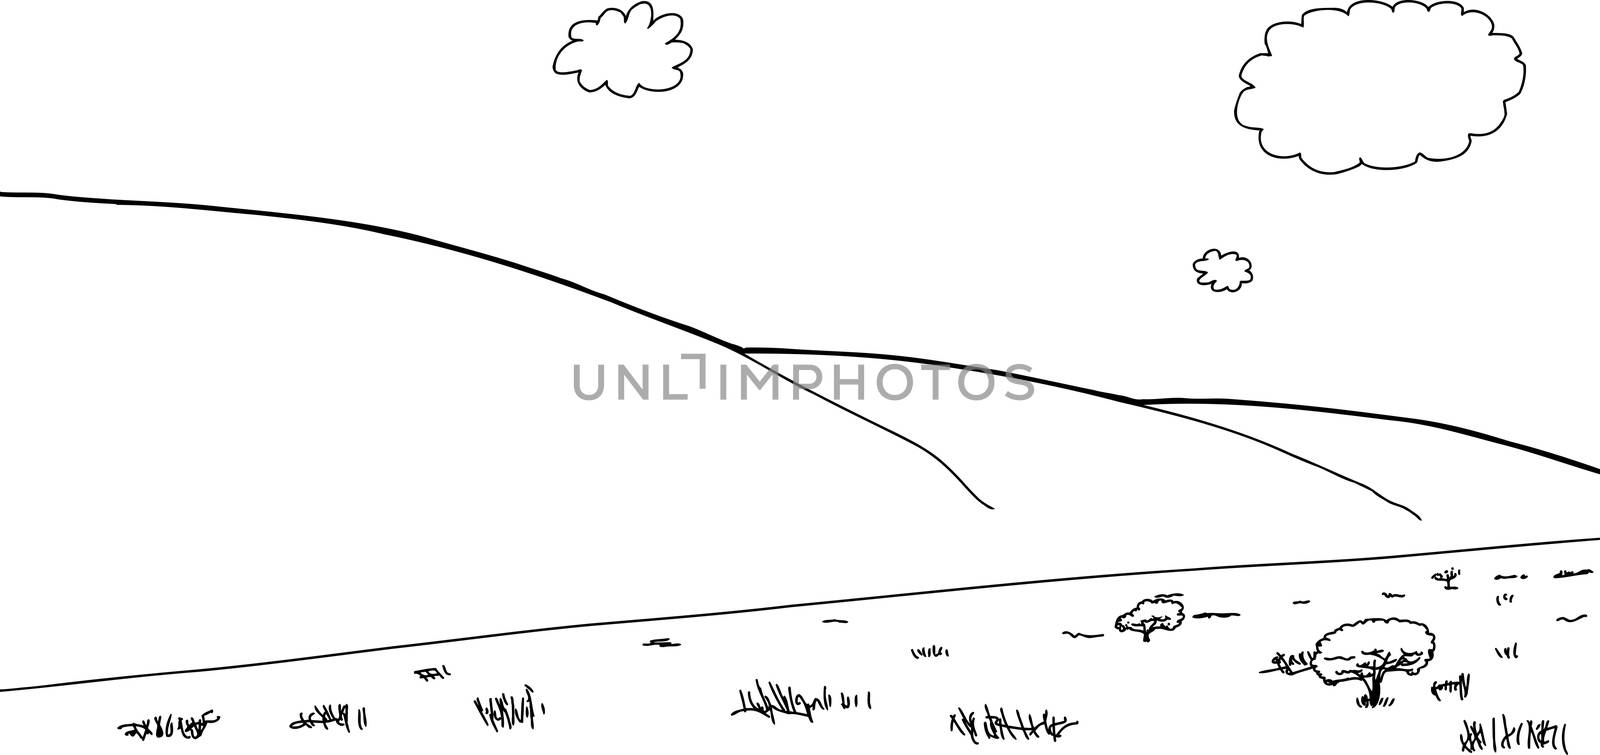 Outline drawing of savannah and mountains in background